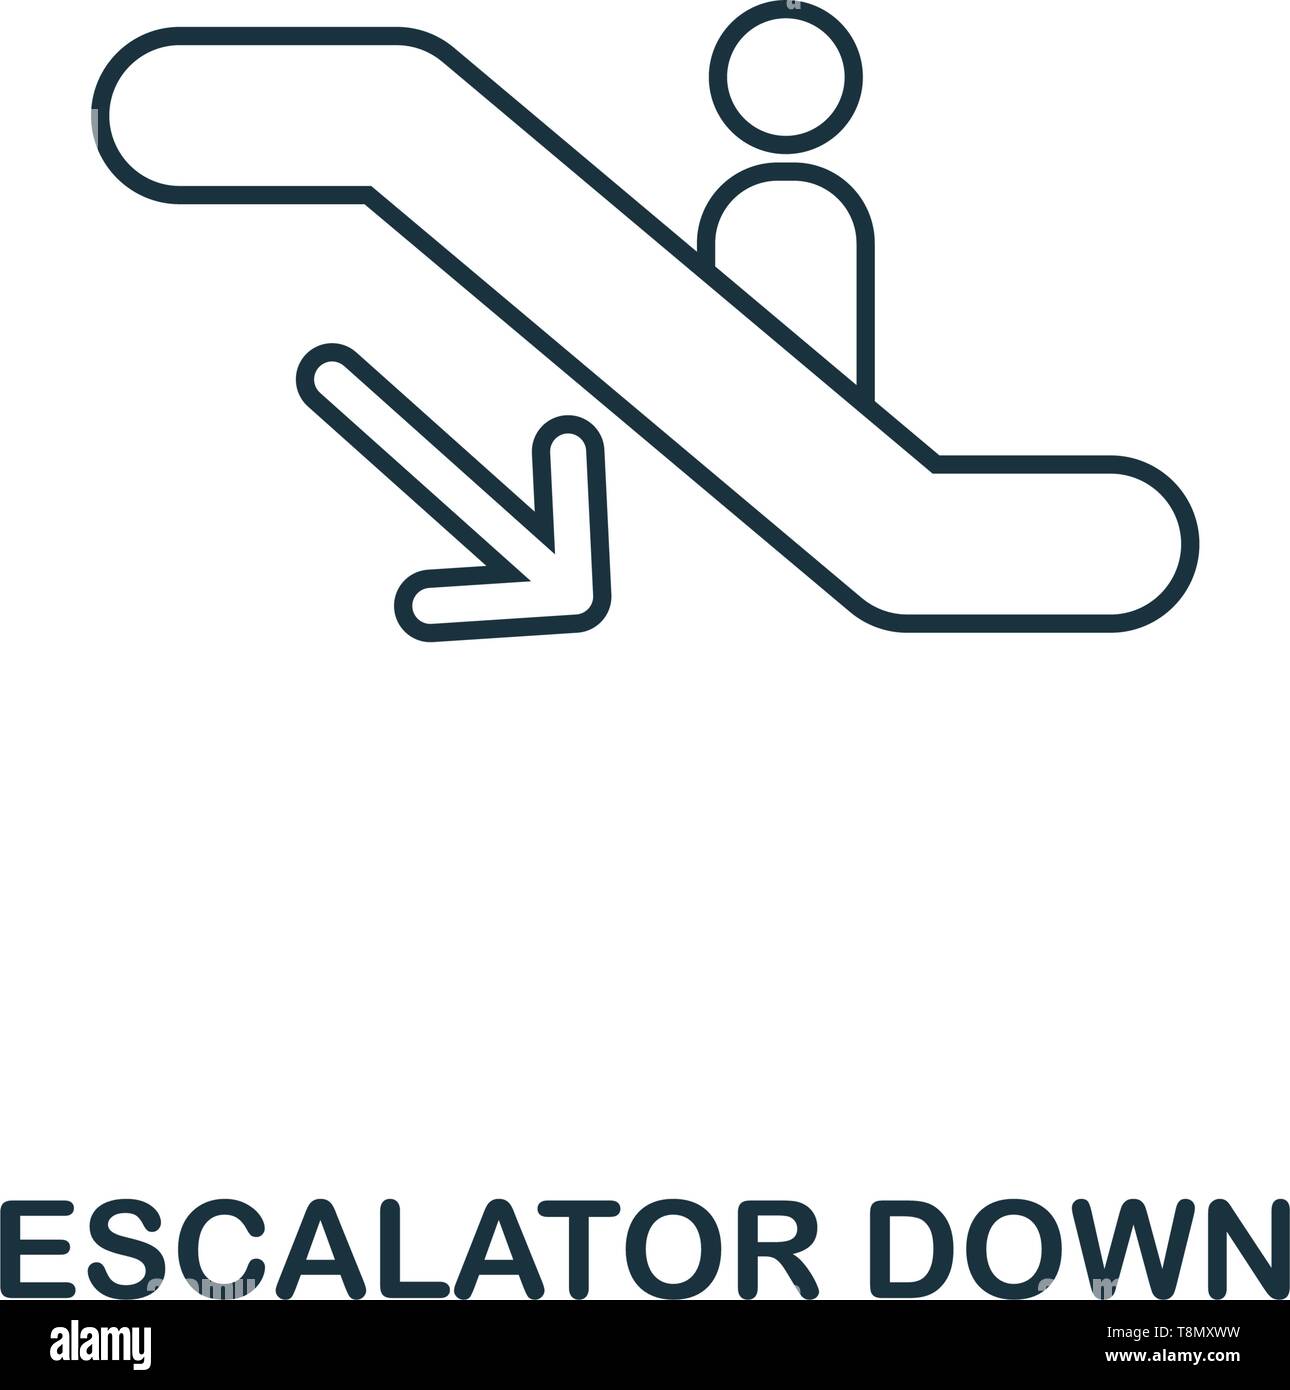 Escalator Down icon. Thin line outline style from shopping center sign icons collection. Premium escalator down icon for design, apps, software and mo Stock Vector